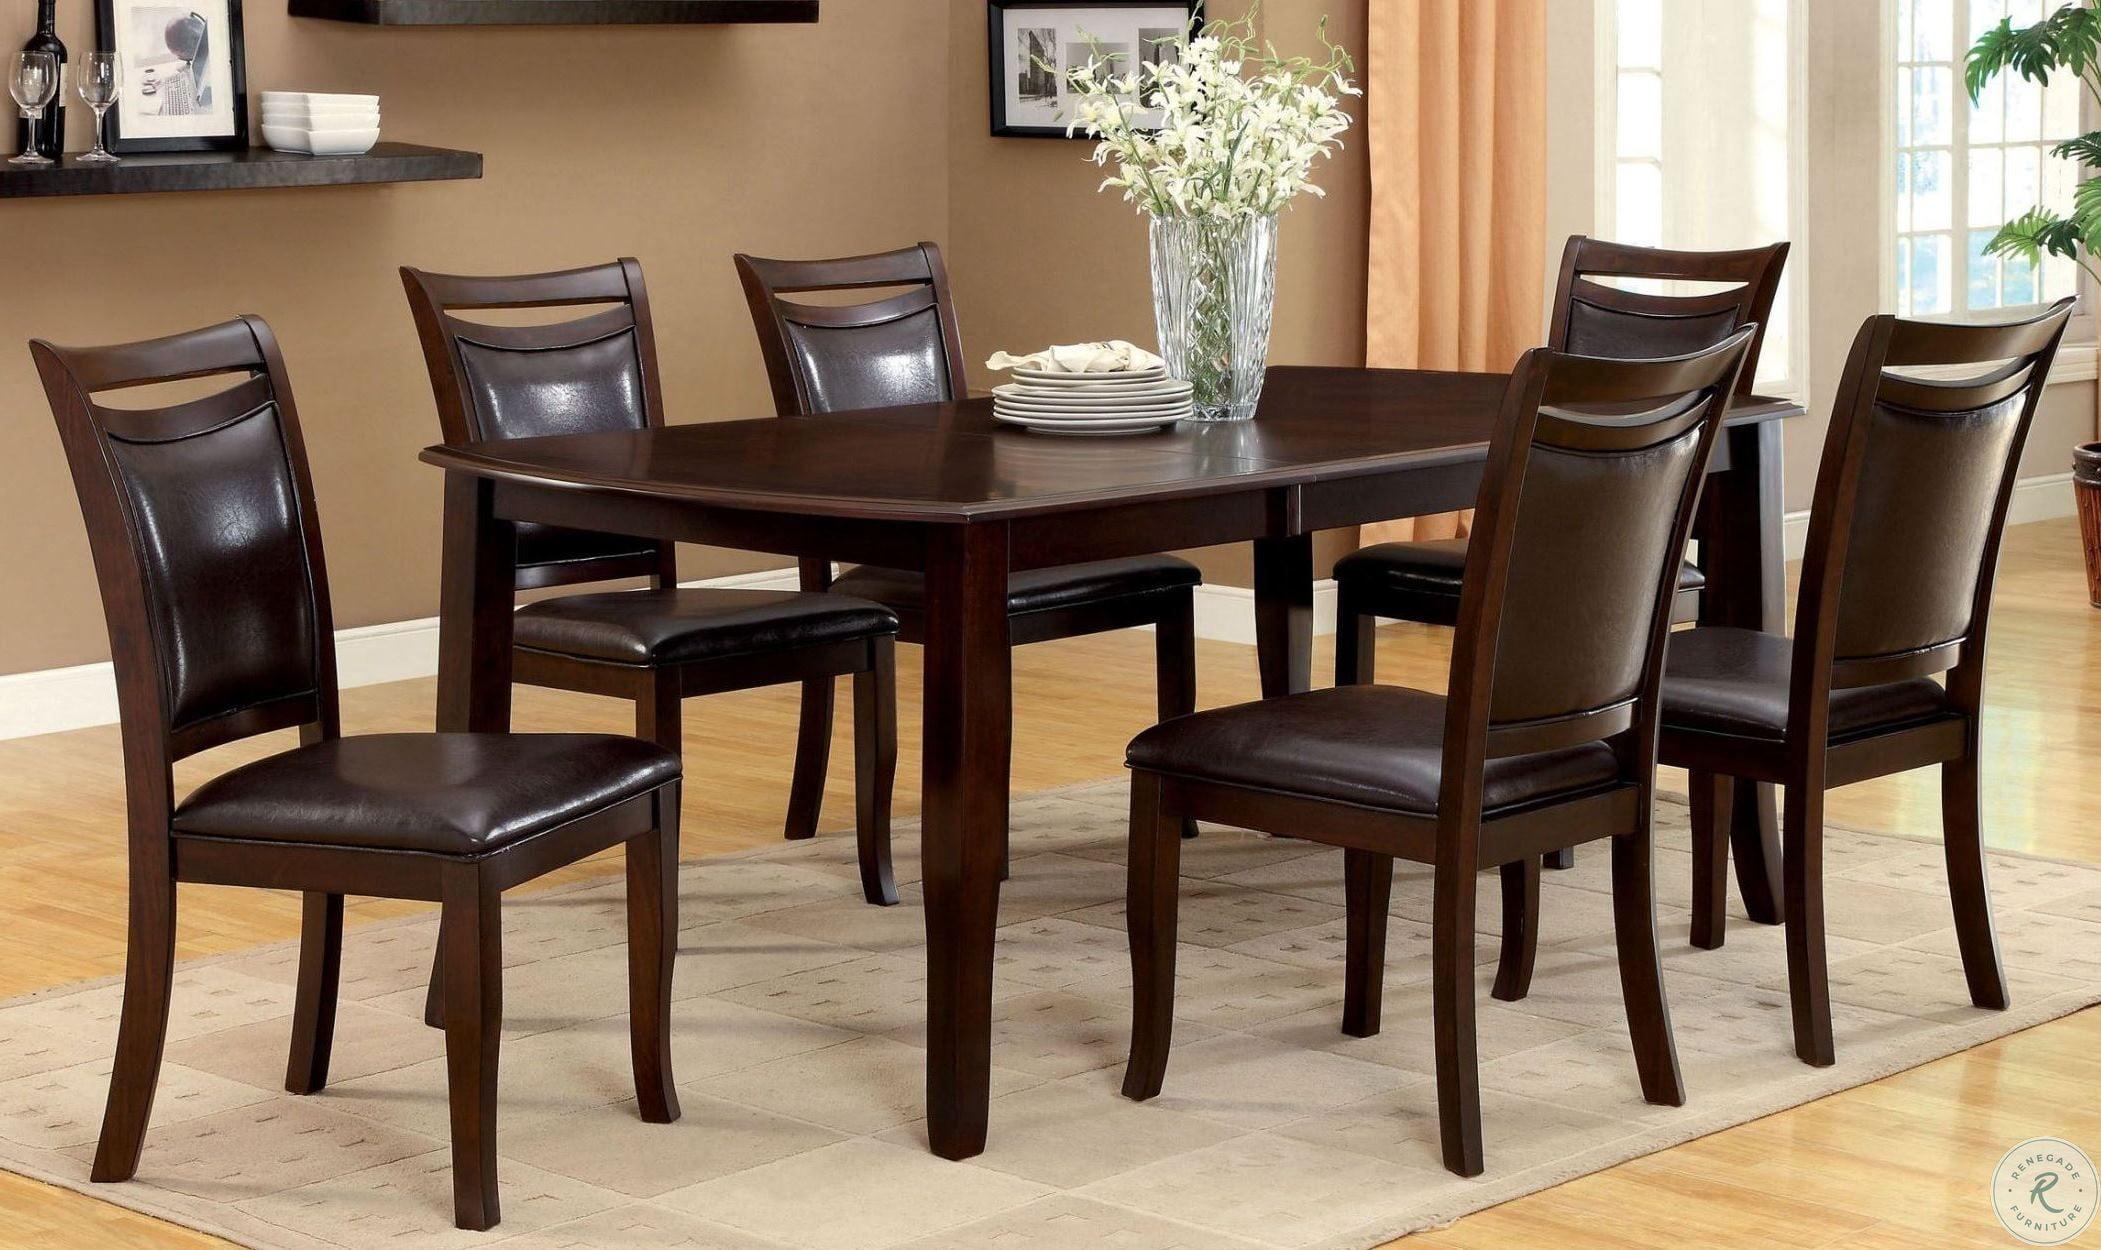 Transitional Dining Table Set WOODSIDE CM3024T-7PC CM3024T-7PC in Dark Cherry Leatherette